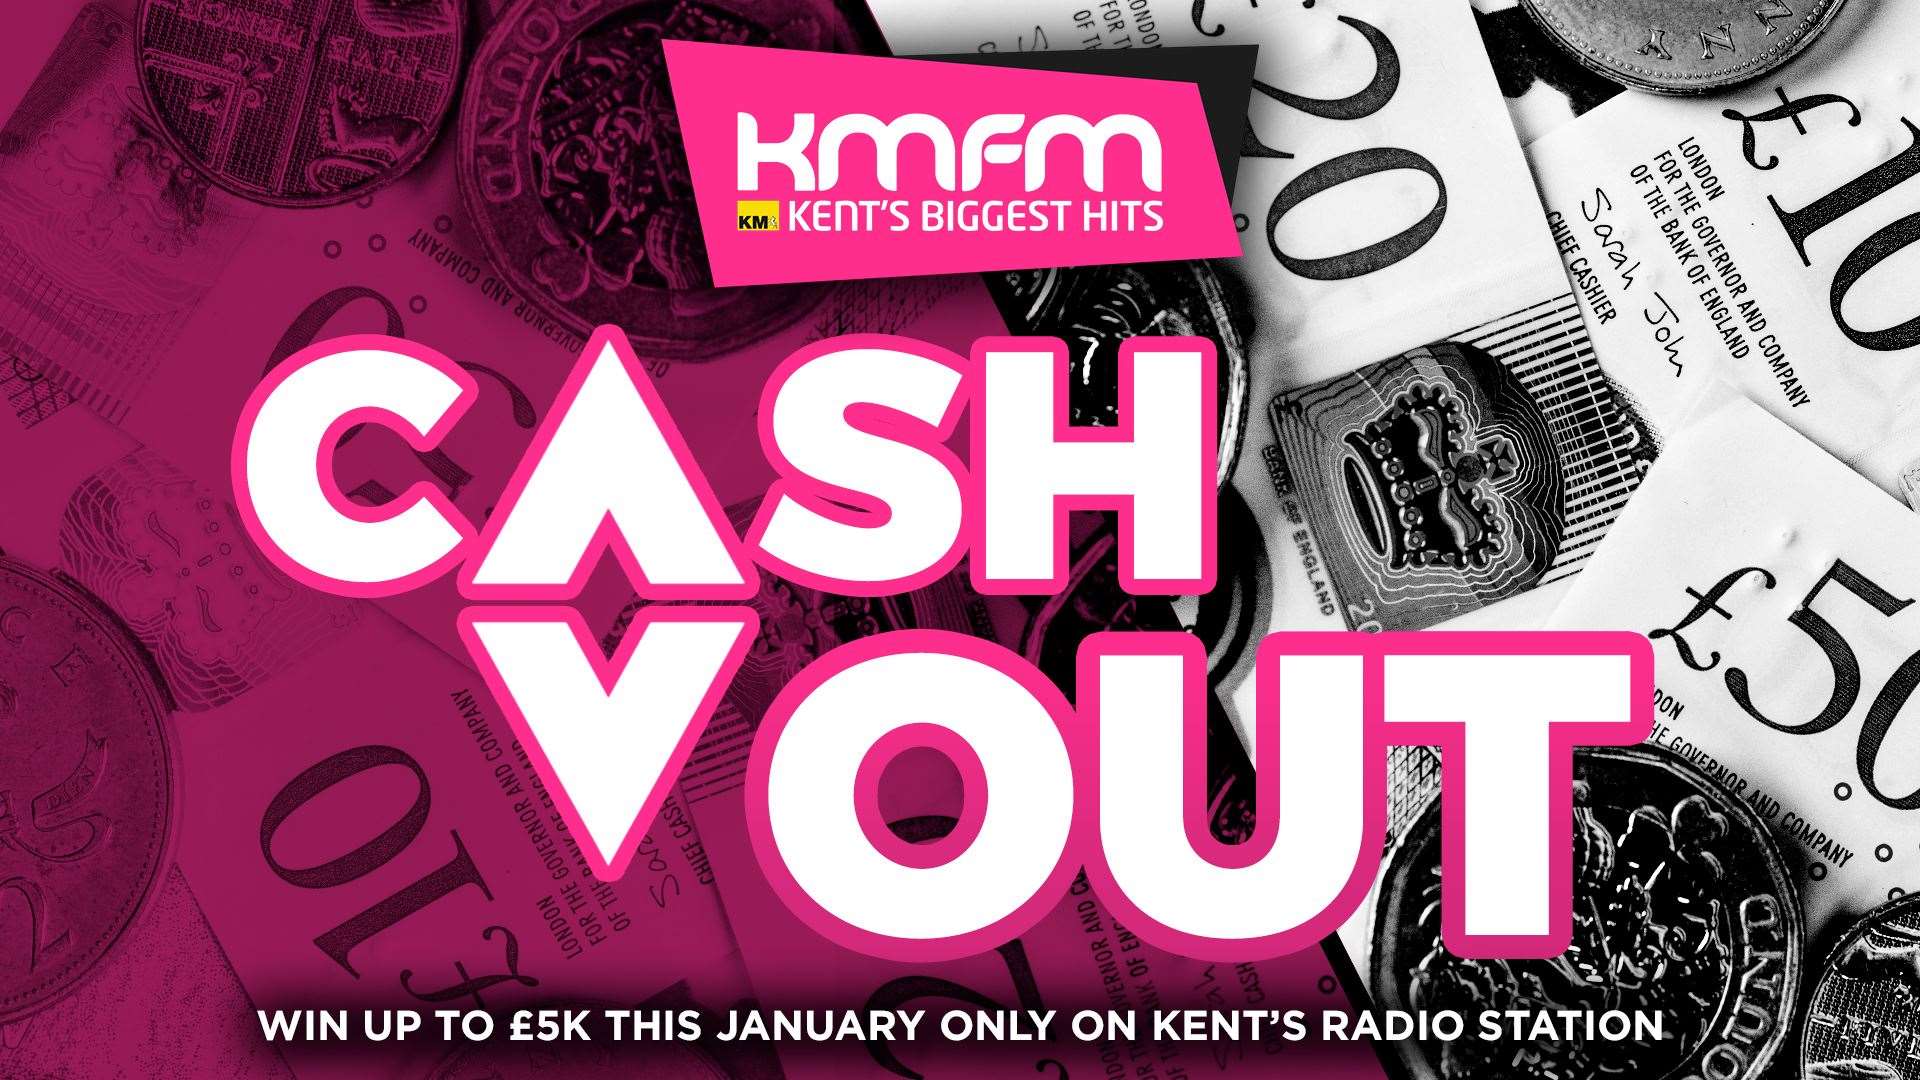 kmfm is giving listeners the chance to win as much as £5,000 in cash